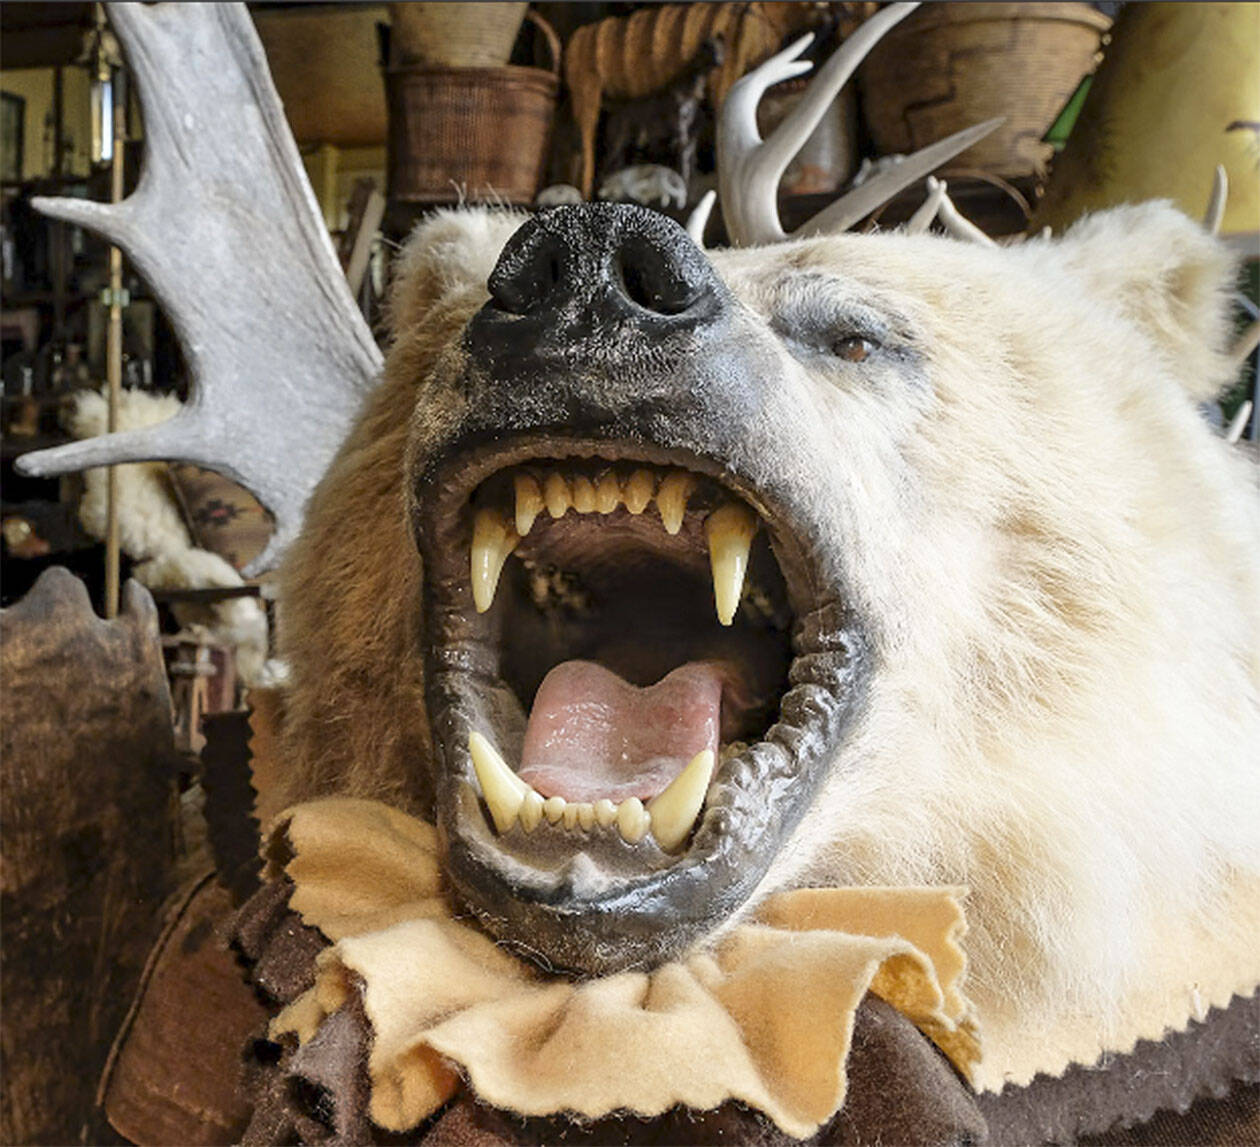 Damon Williams/Kitsap News Group photos
A bear is just one of the taxidermy mounts in the home of Ruth Reese.